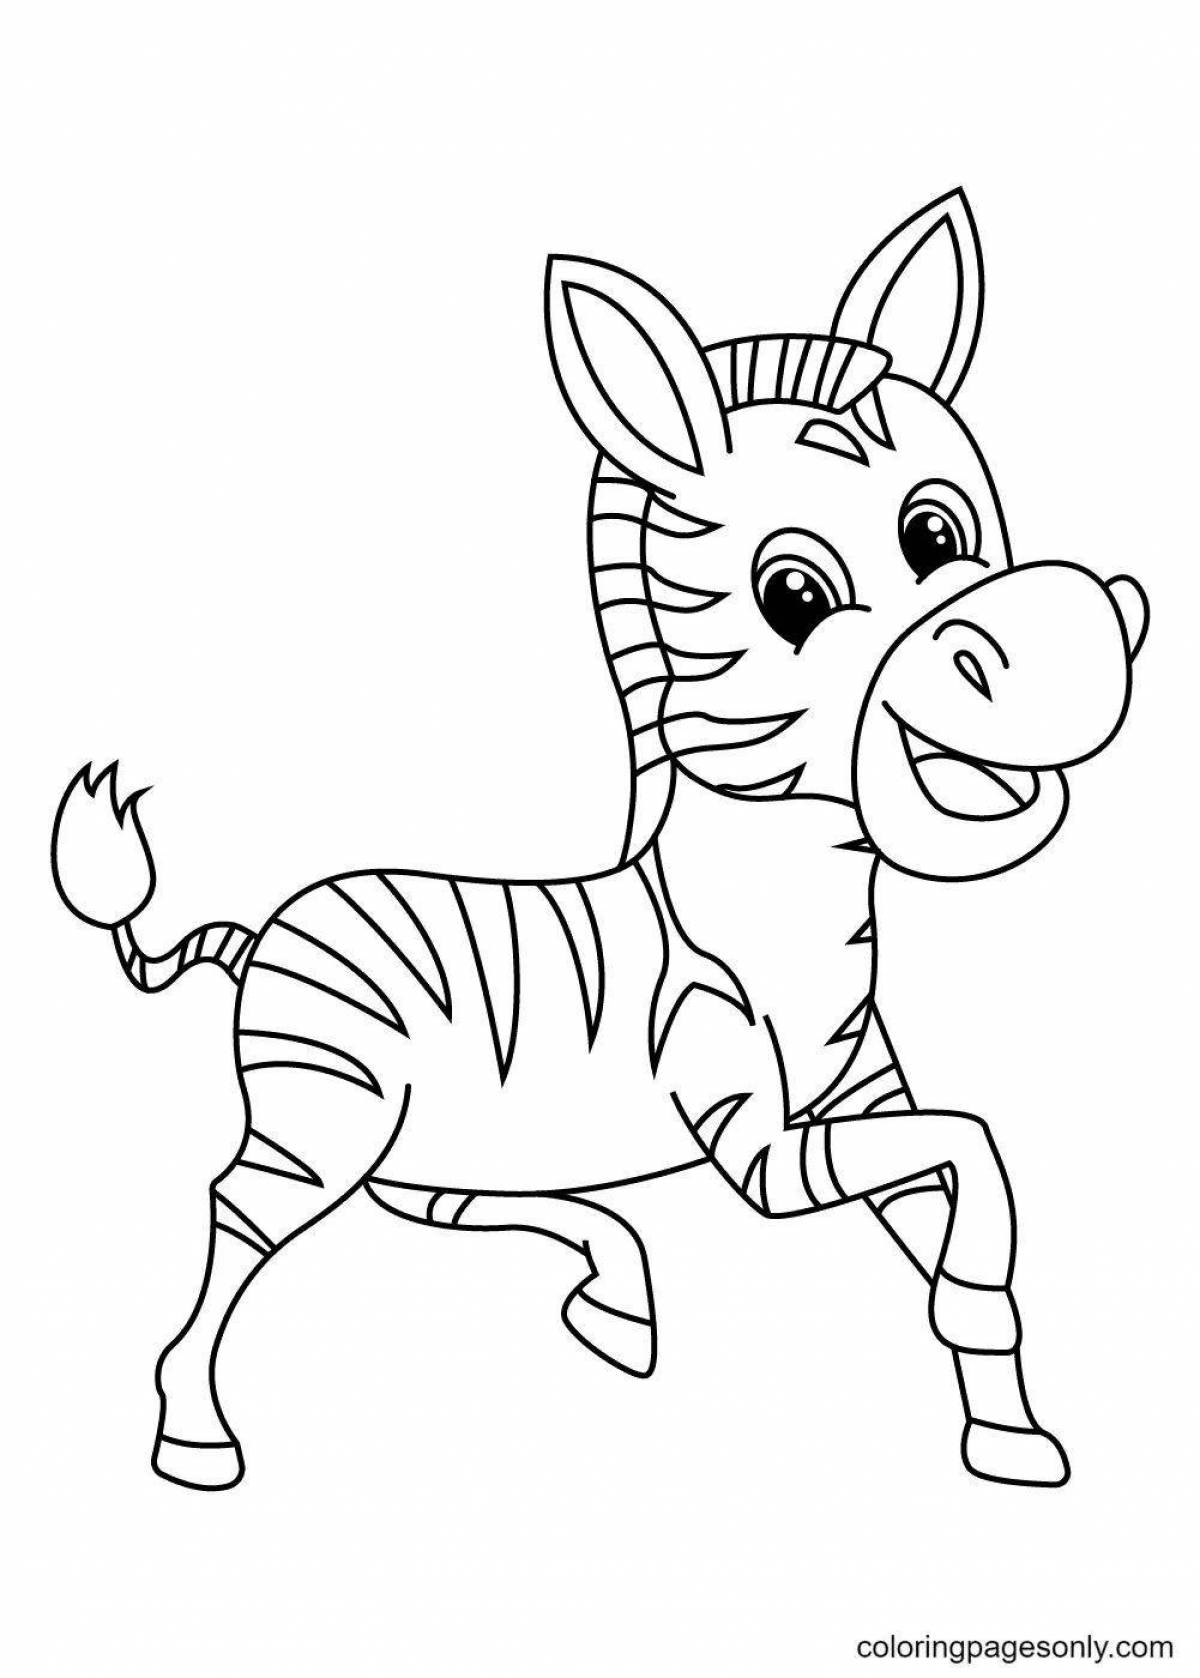 Zebra playful coloring book for 3-4 year olds